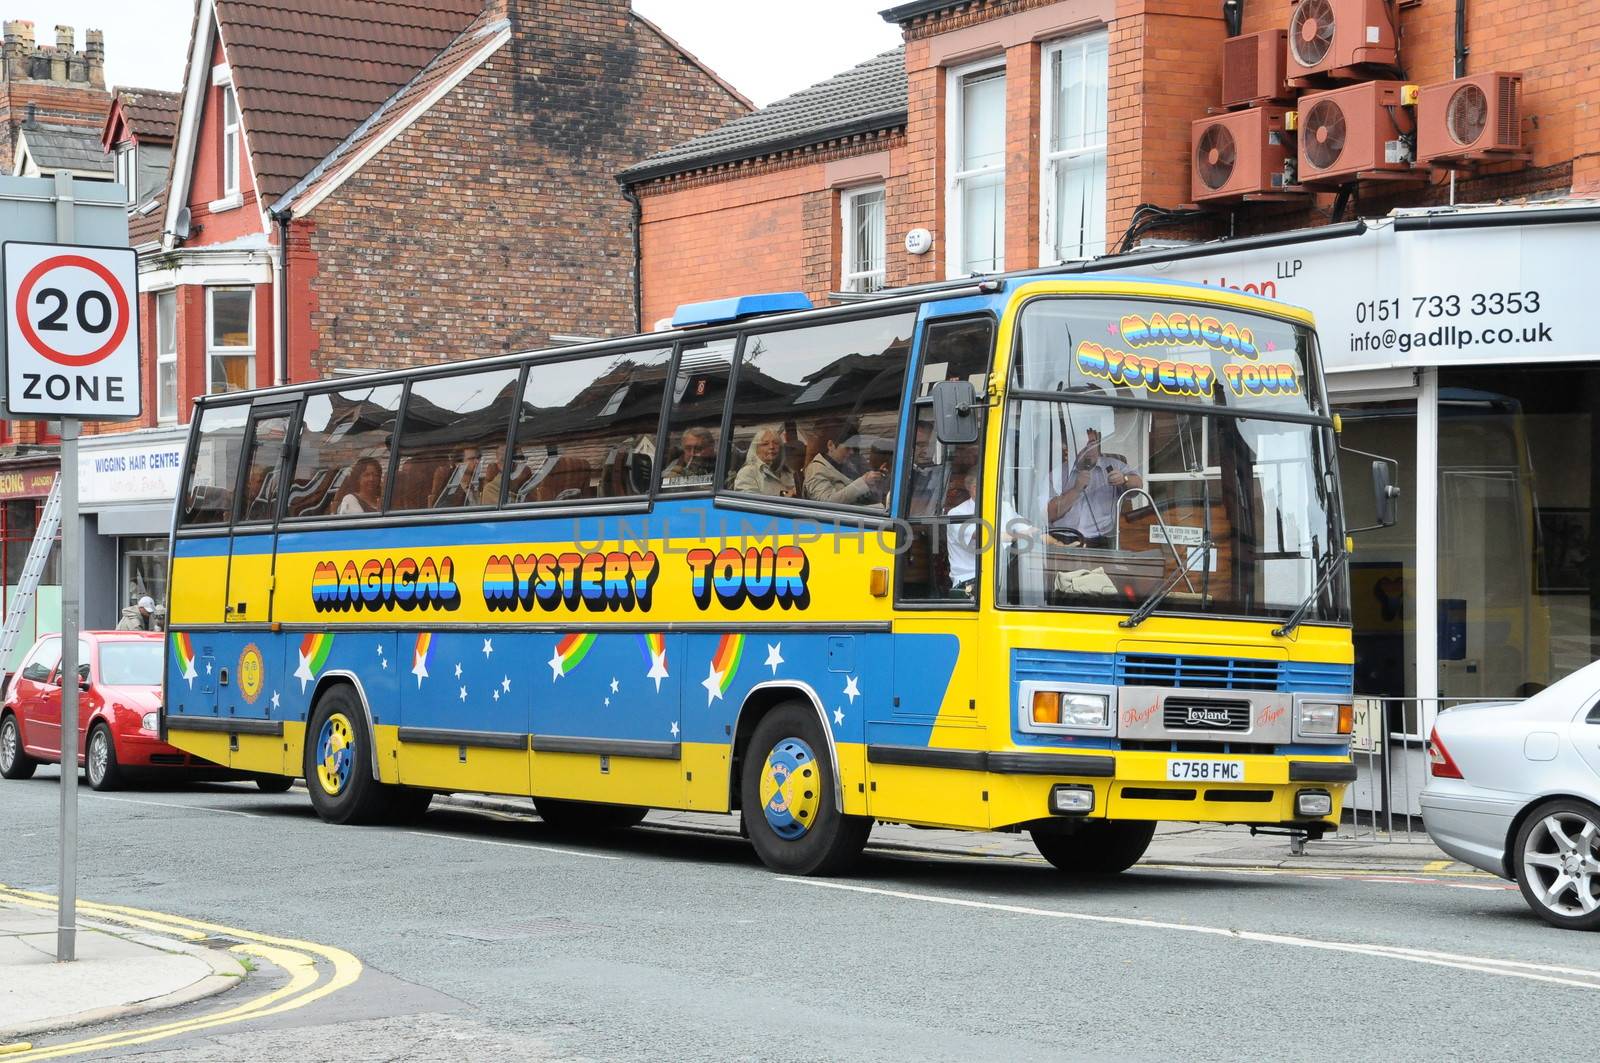 Magical mystery tour coach Liverpool